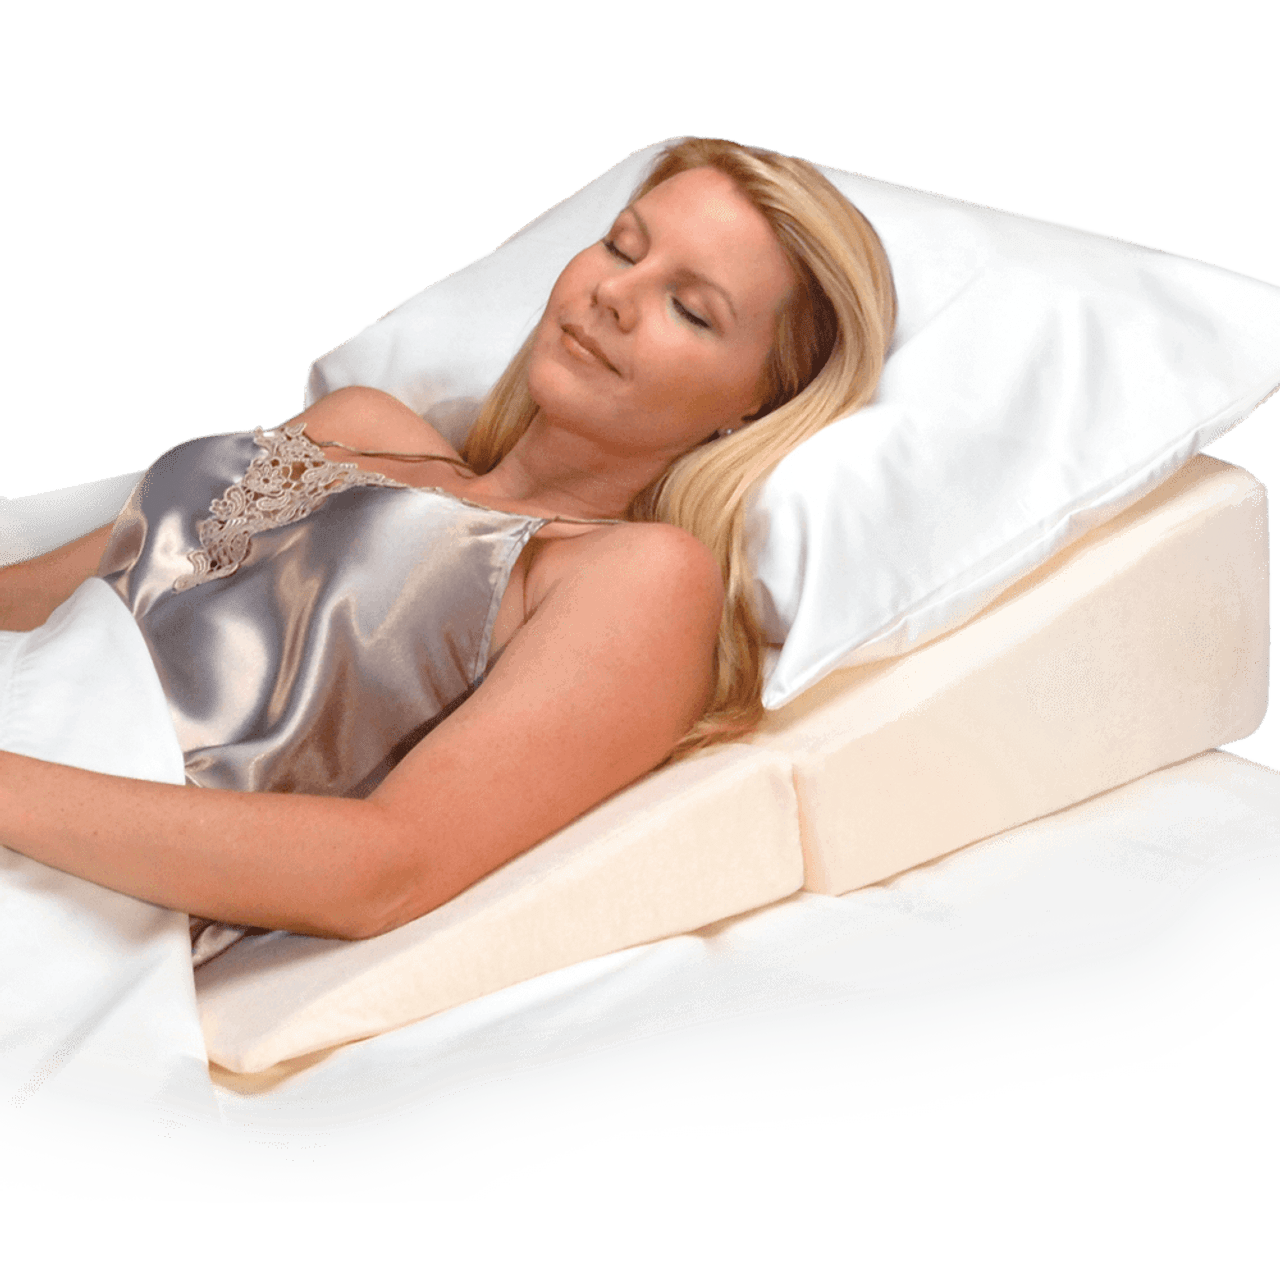 How to Use a Wedge Pillow: Bed Wedge Pillow Benefits  Wedge pillow, Bed  wedge pillow, Leg elevation pillow